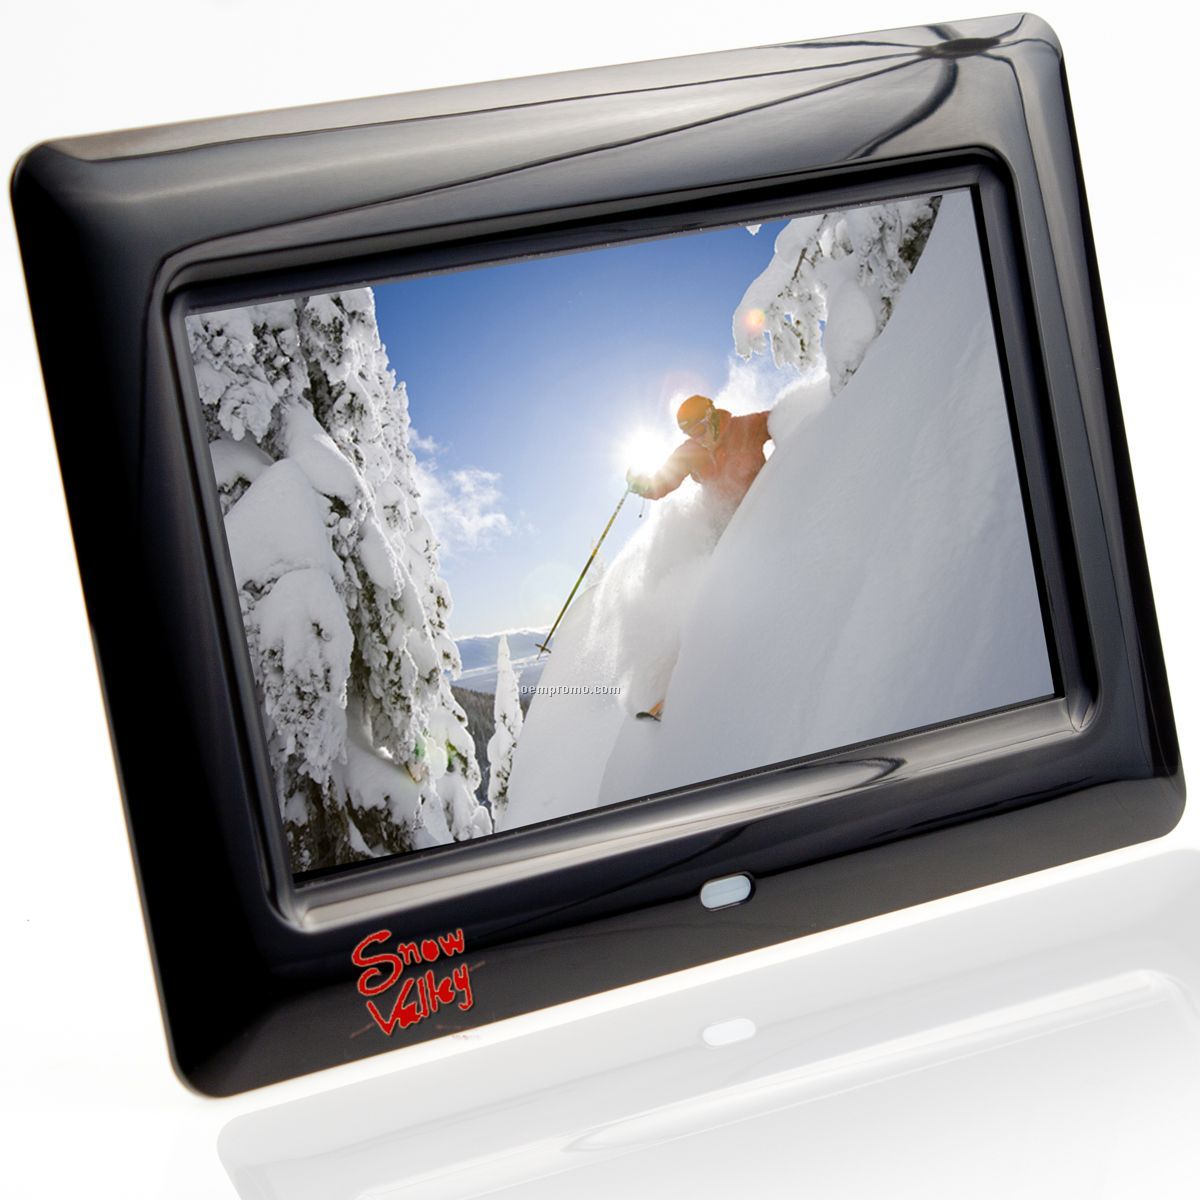 7" Digital Picture Frame - Multi Function